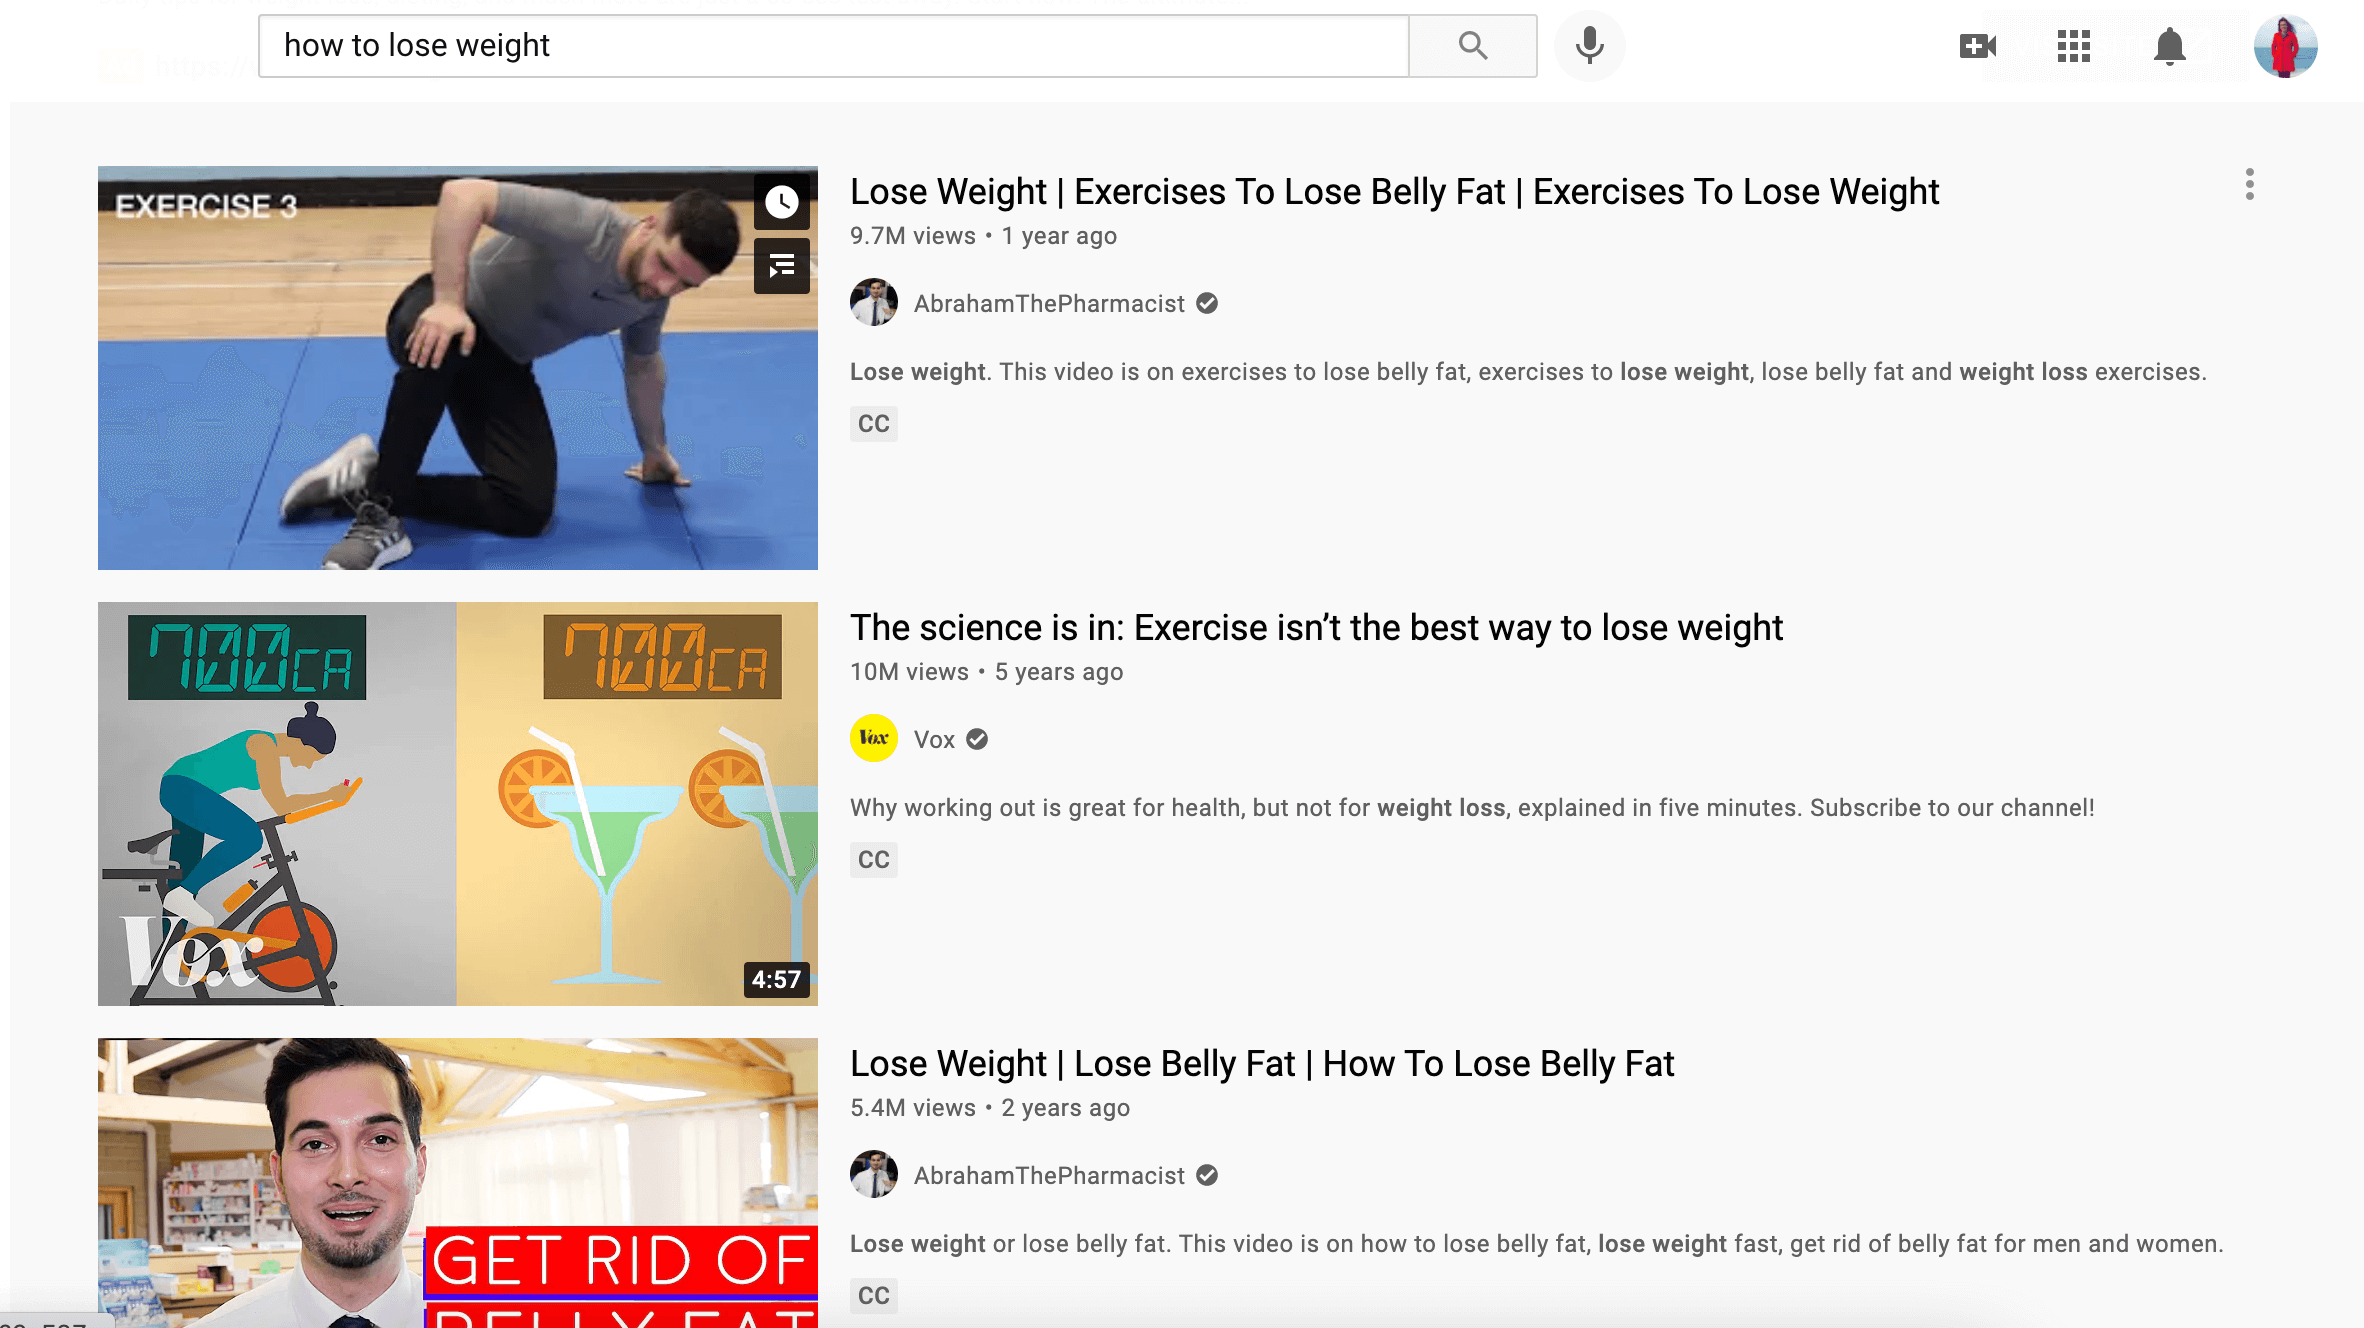 YouTube search for how to lose weight